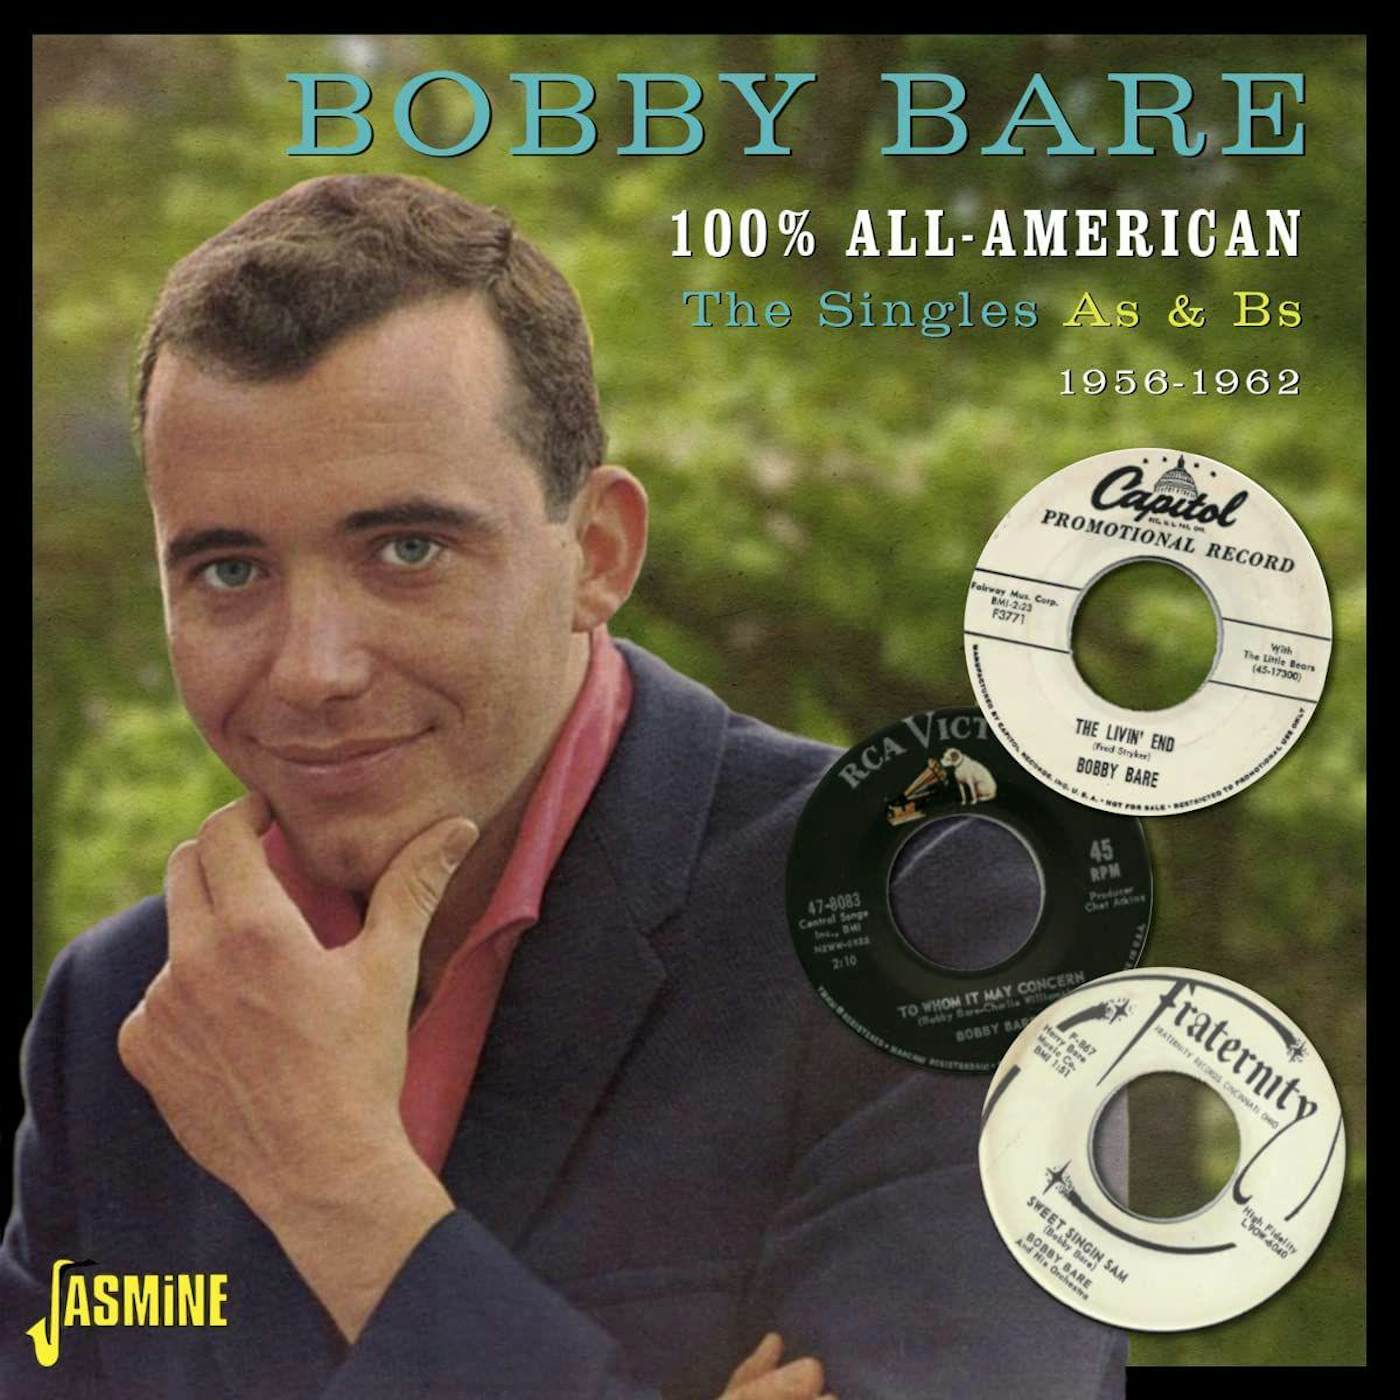 Bobby Bare 100% All American: The Singles As & Bs 1956-1962 CD